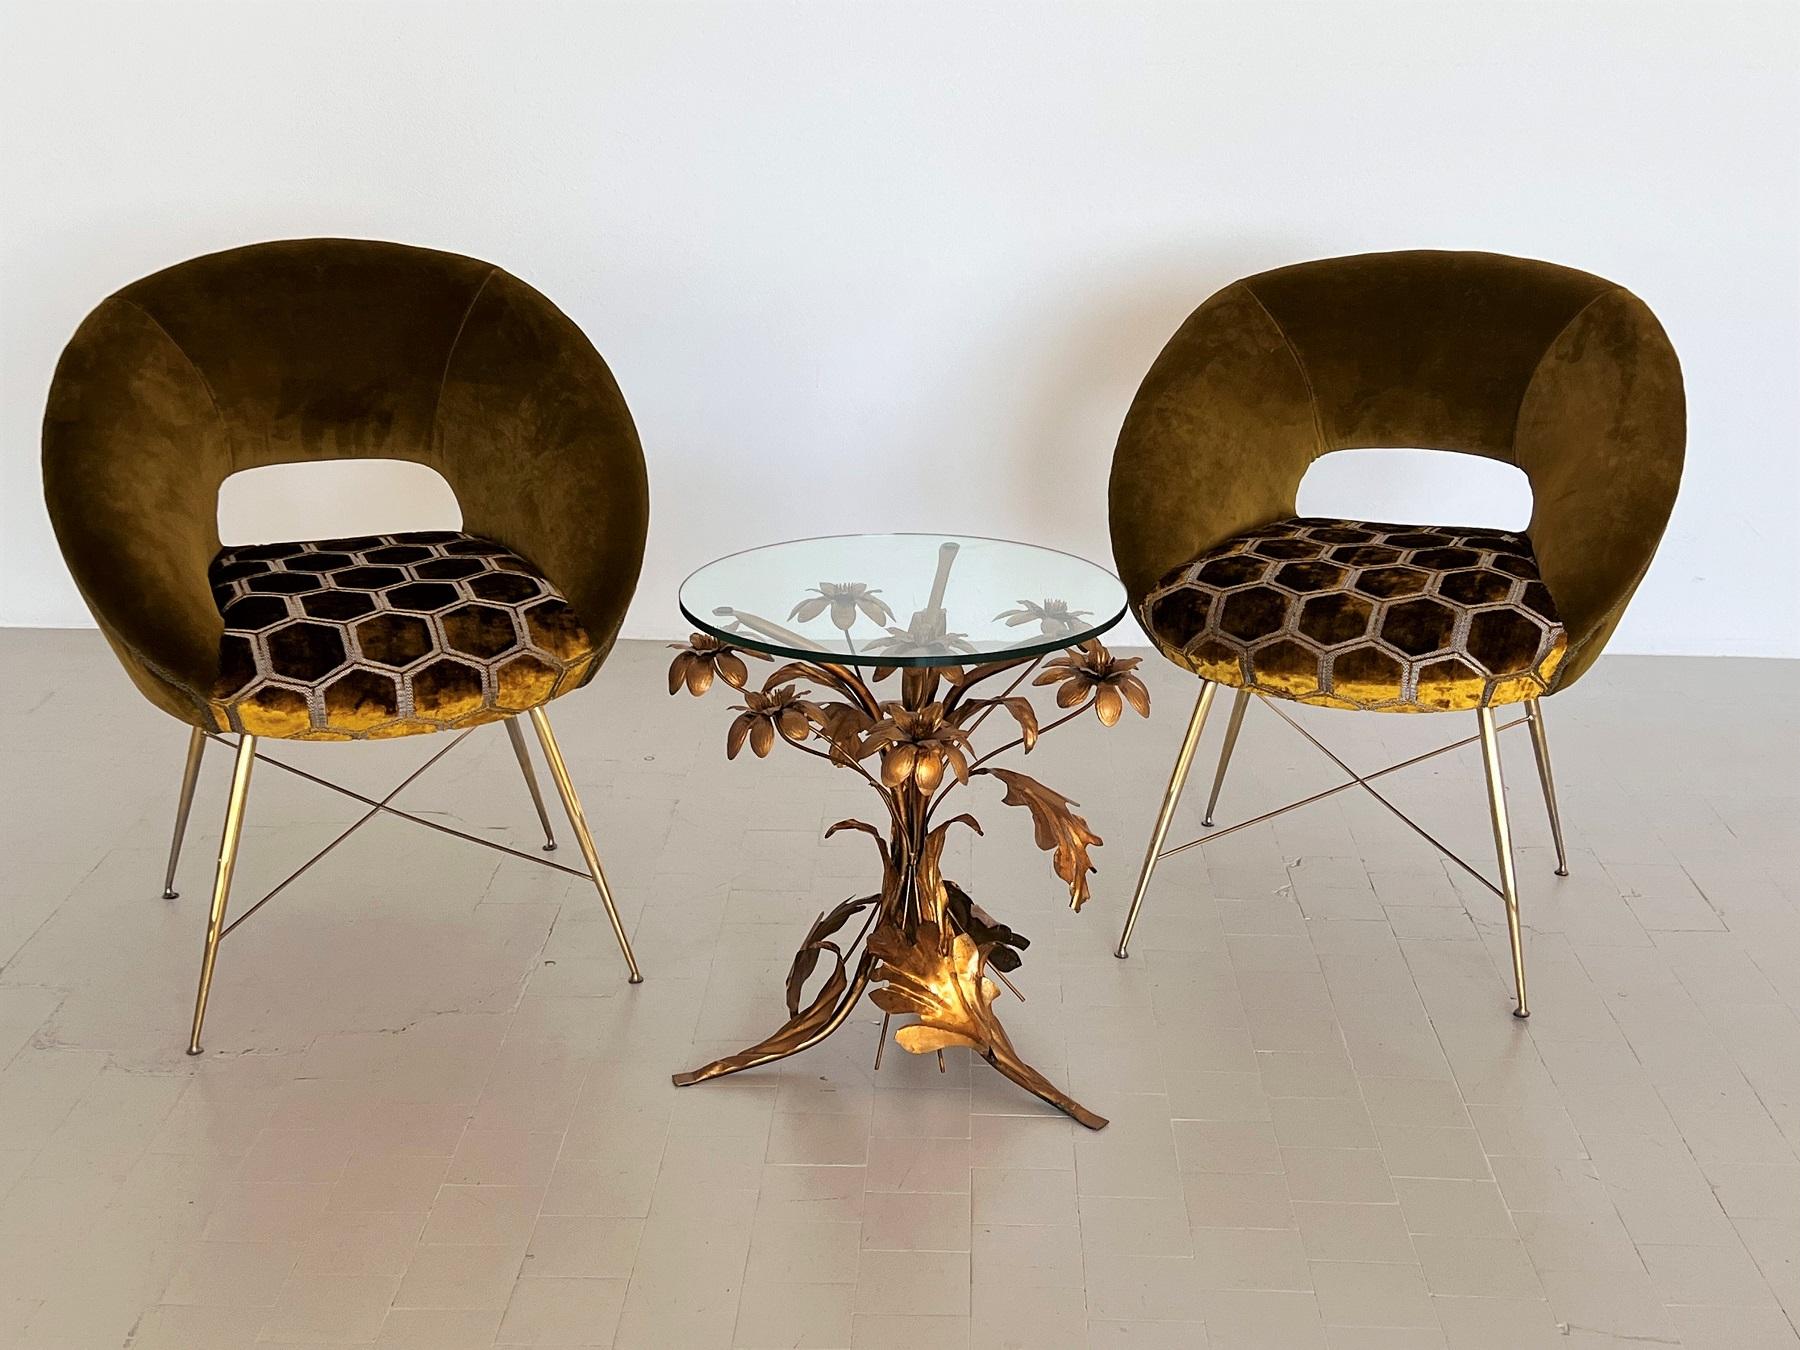 Beautiful set of two side chairs designed by Silvio Cavatorta in the 1950s and manufactured in Italy.
The chair bases are made of full shiny brass, which have been polished.
Completely re-upholstered inside - outside with quality materials.
Outside